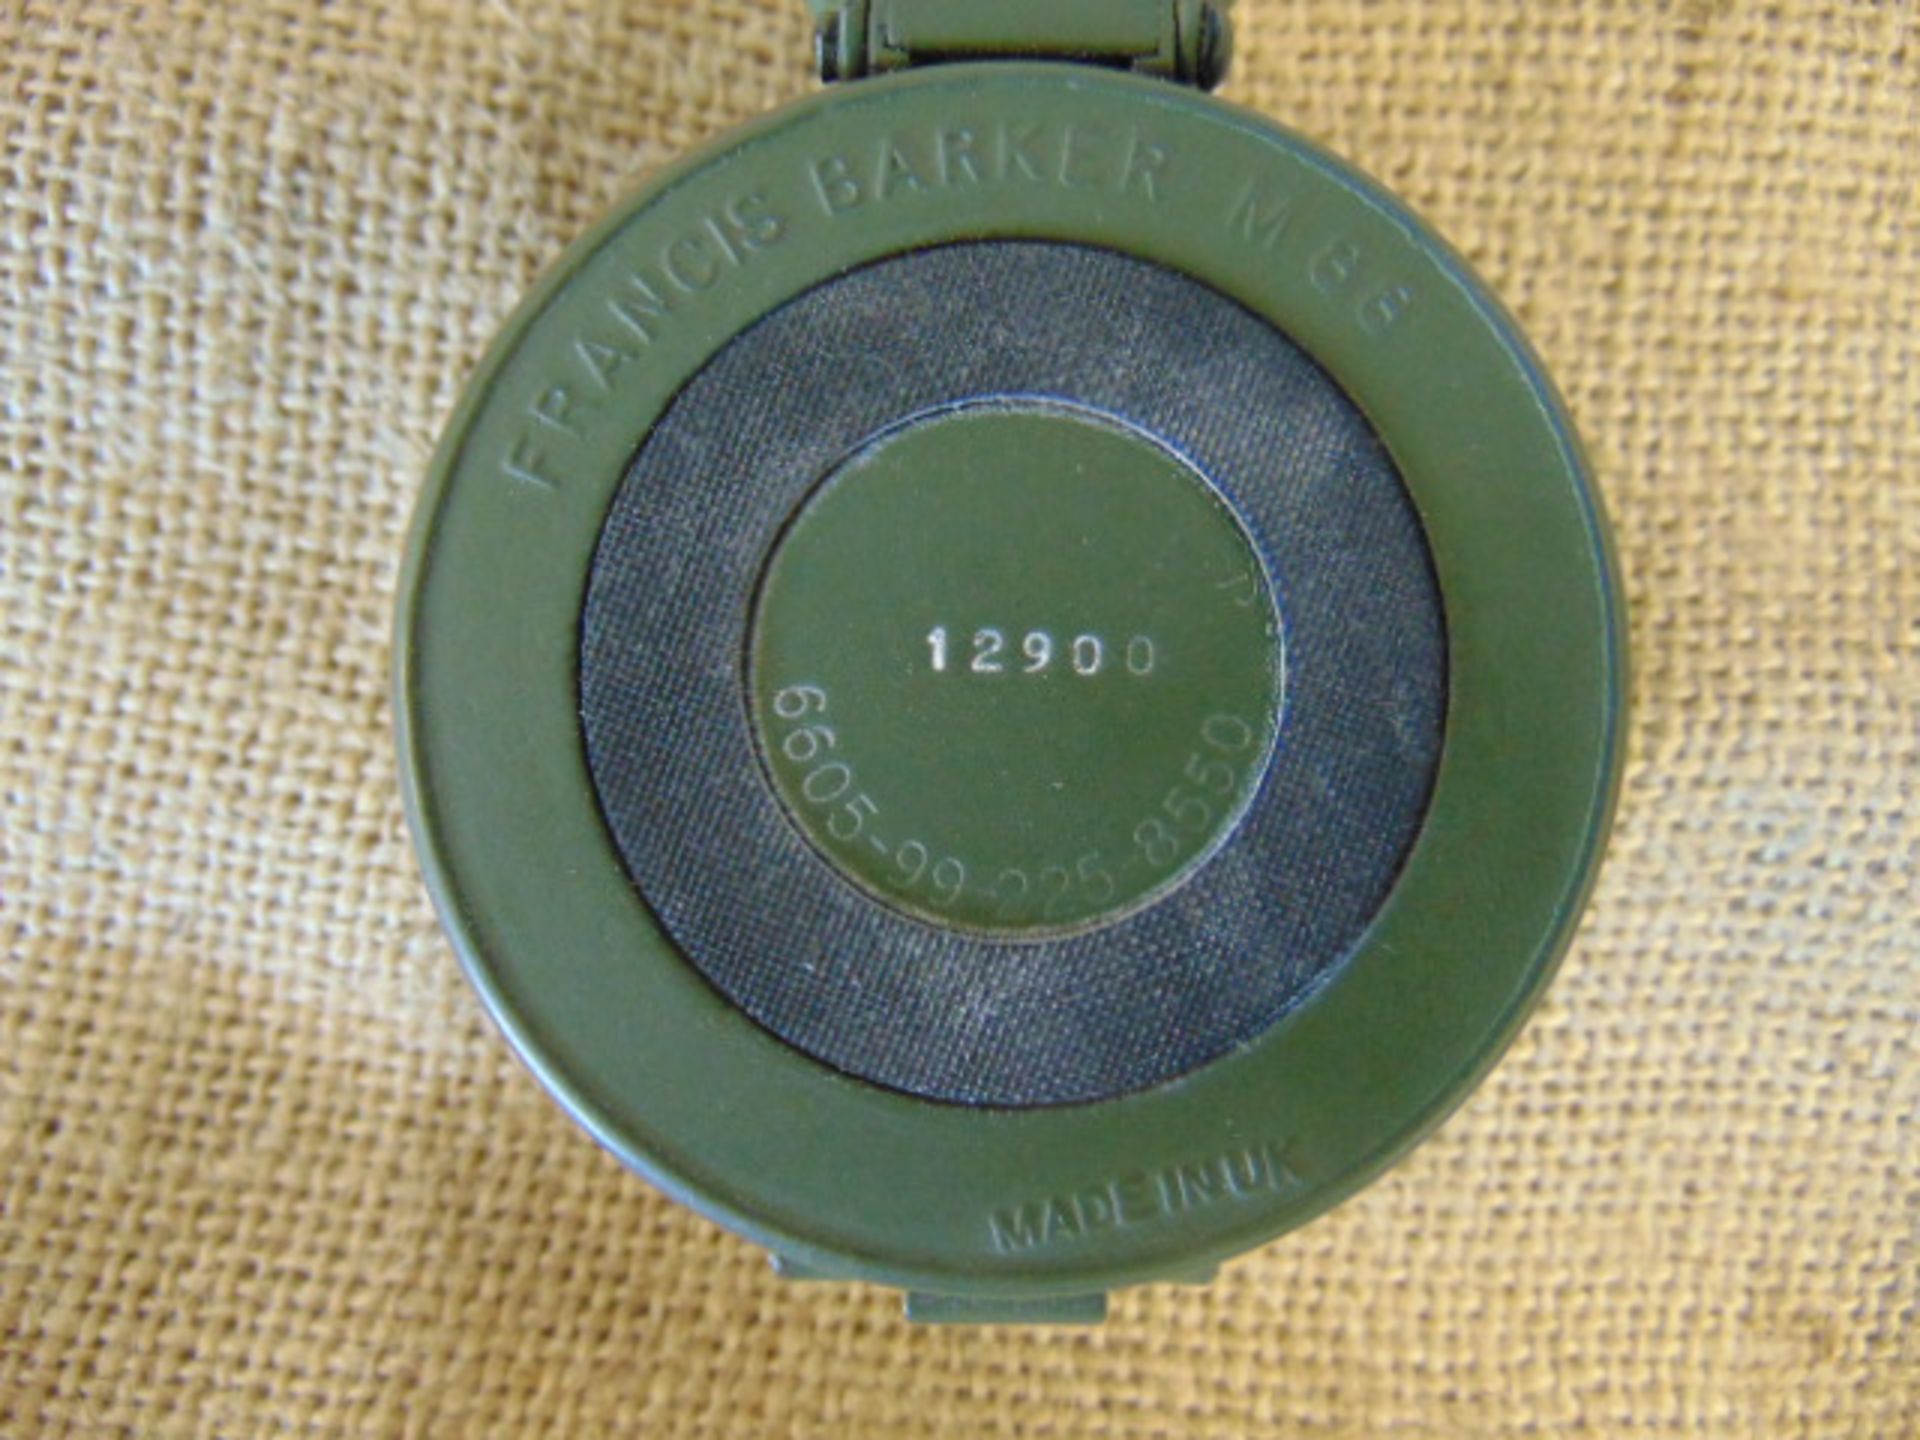 Unissued Genuine British Army Francis Barker M88 Prismatic Marching Compass - Image 3 of 5